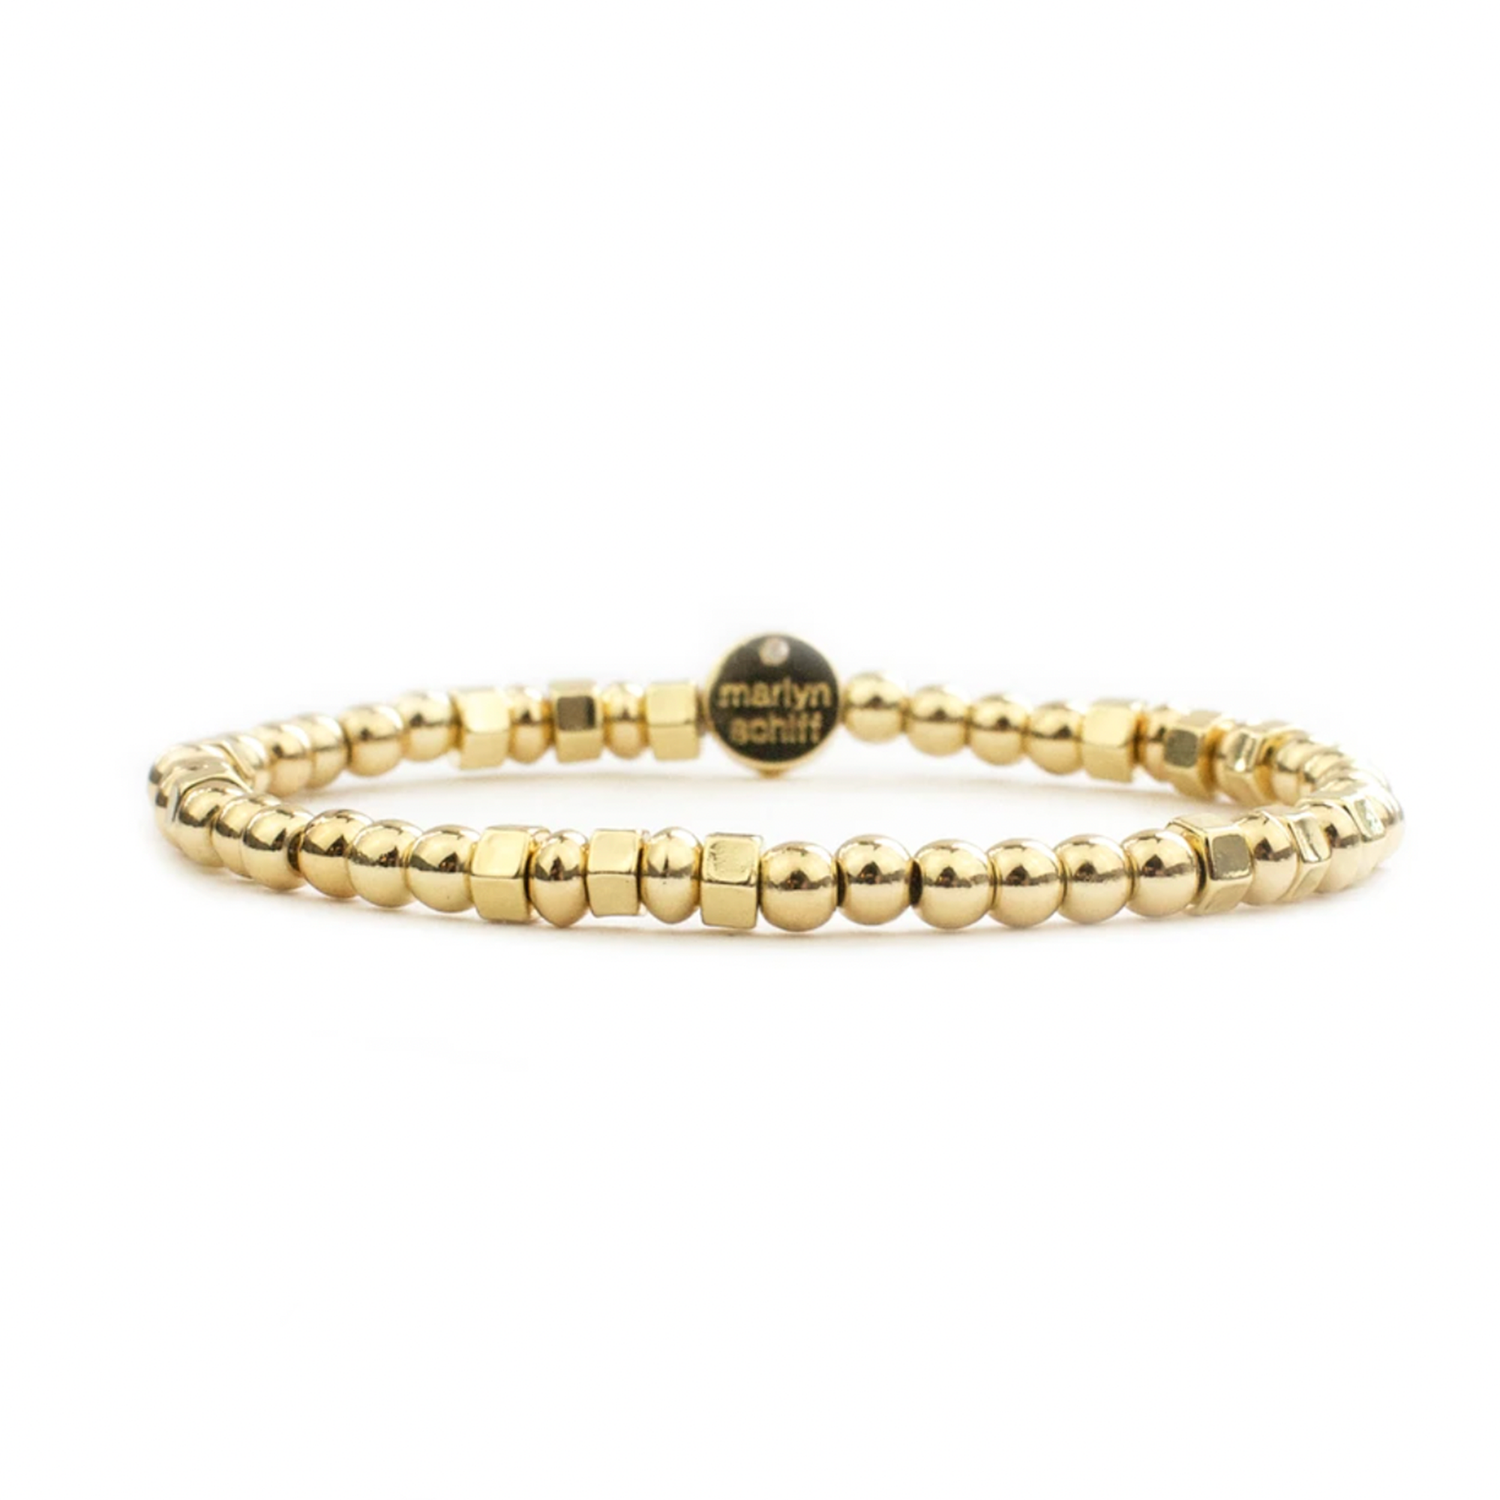 Marlyn Schiff Brass Beaded Ball & Square Bracelet. Metal stretch bracelet with small mixed circle and square beads.